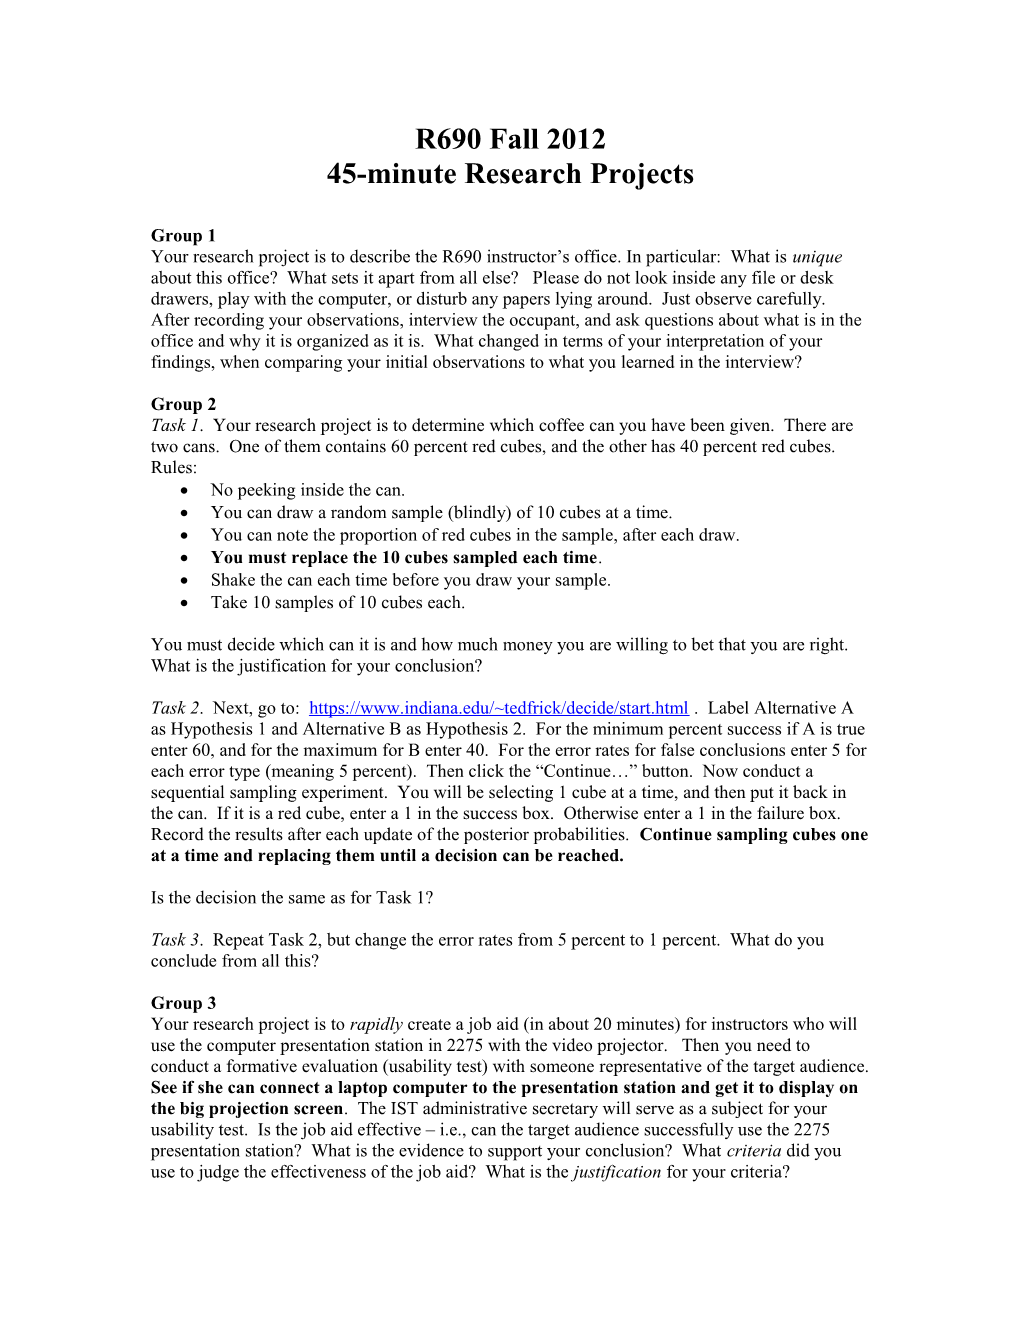 45-Minute Research Projects